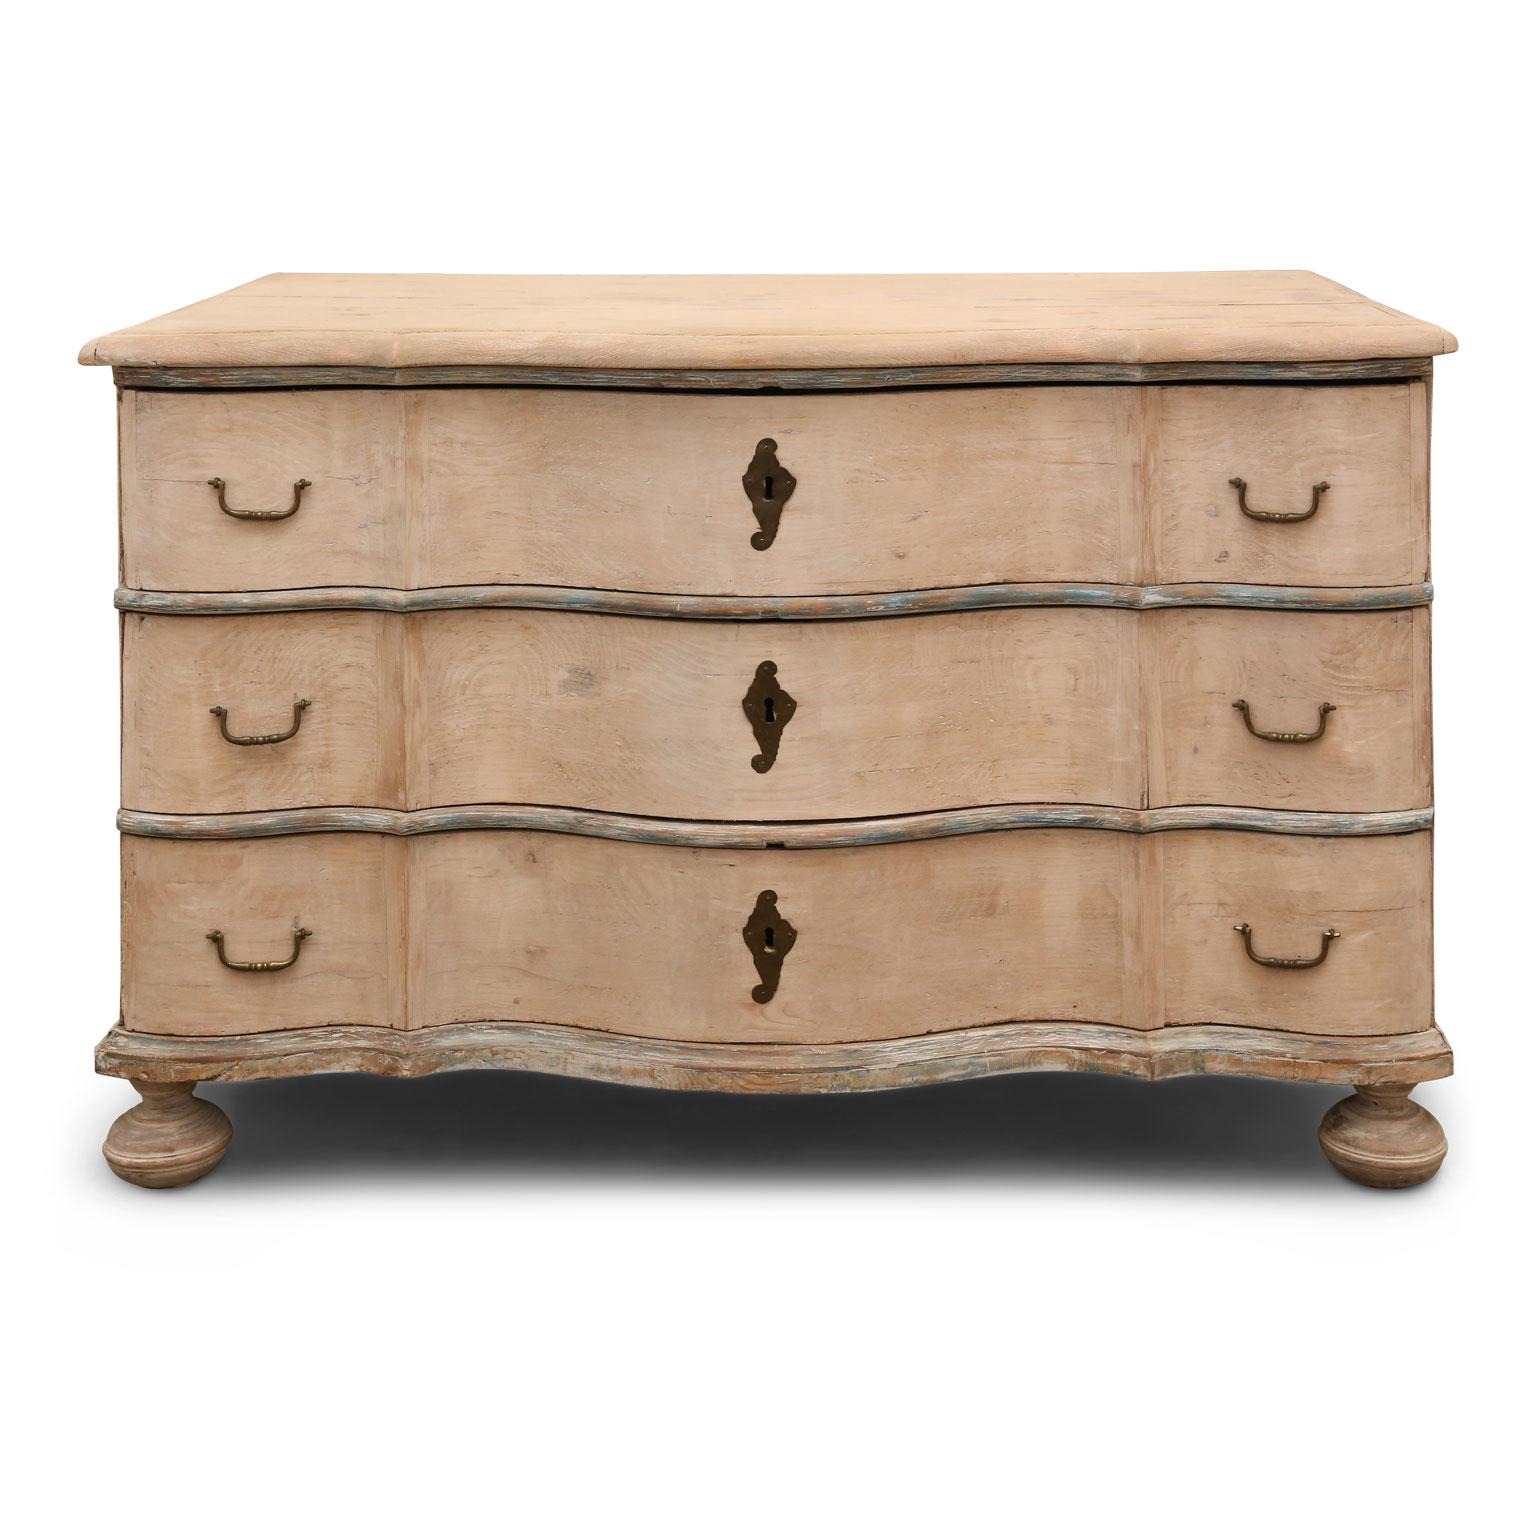 Serpentine front chest of drawers, hand carved in the 19th century, France. Subtle washed finish. All complete, sturdy in excellent condition. Nice, large scale.